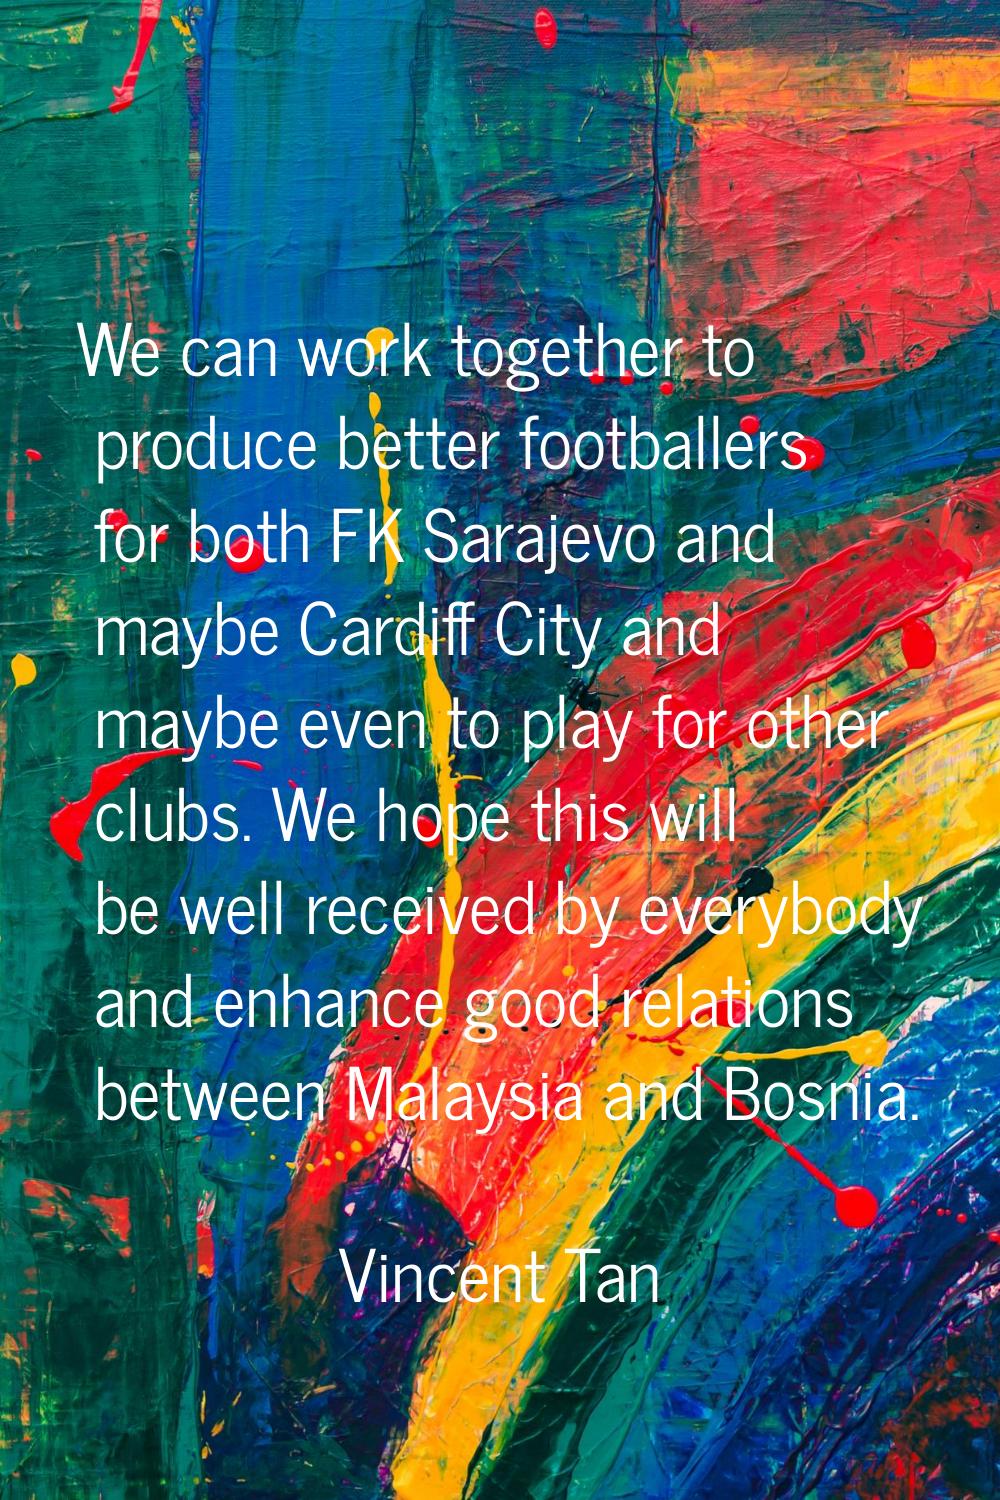 We can work together to produce better footballers for both FK Sarajevo and maybe Cardiff City and 